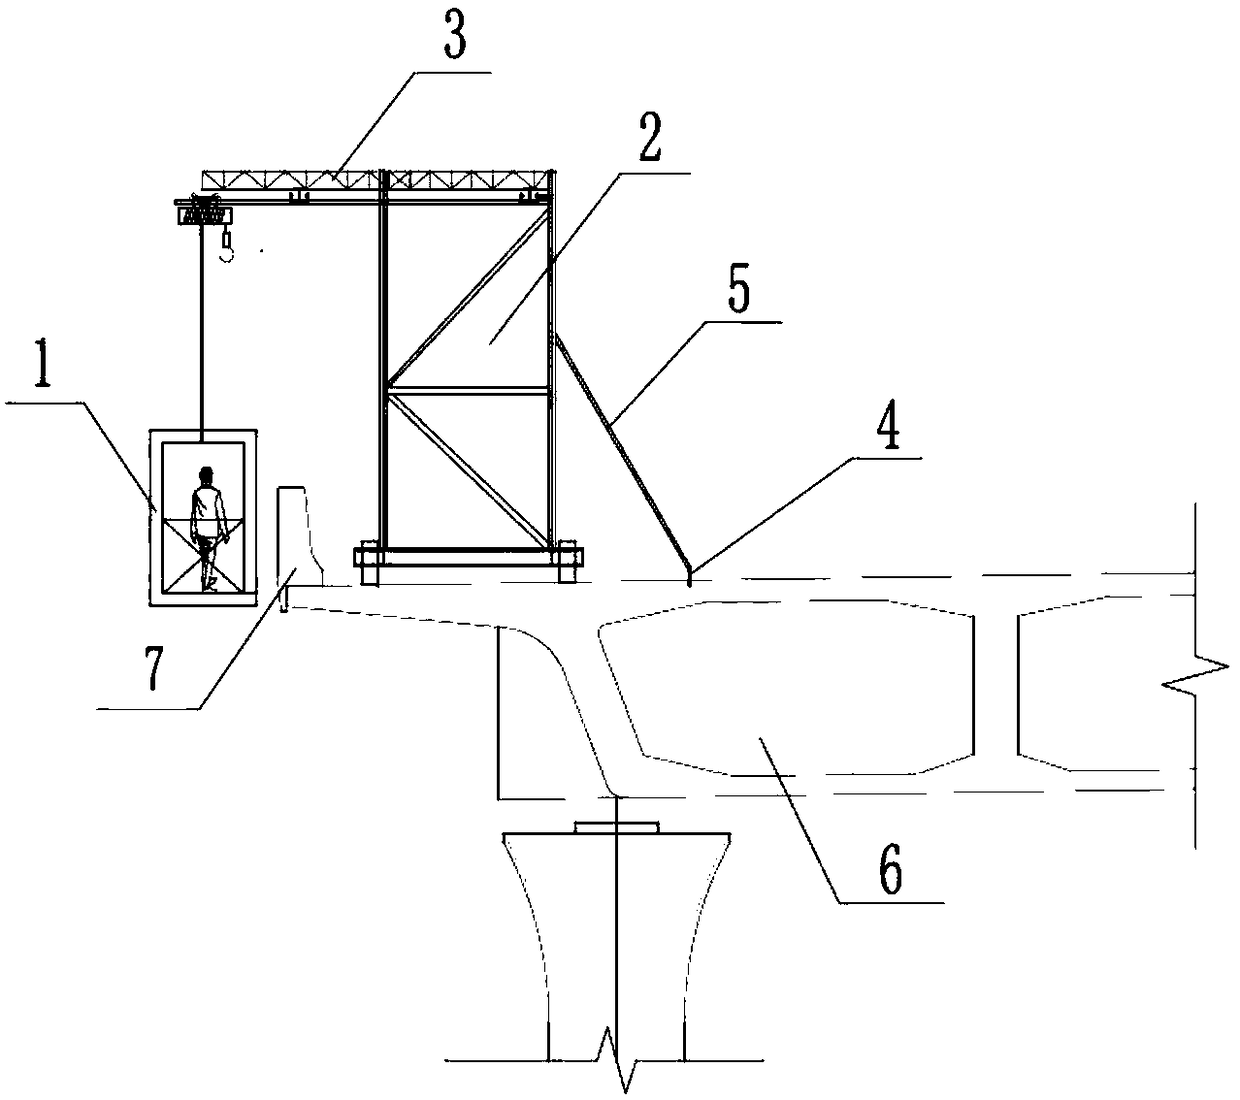 Safety construction method of cast-in-place reinforced concrete crash barrier